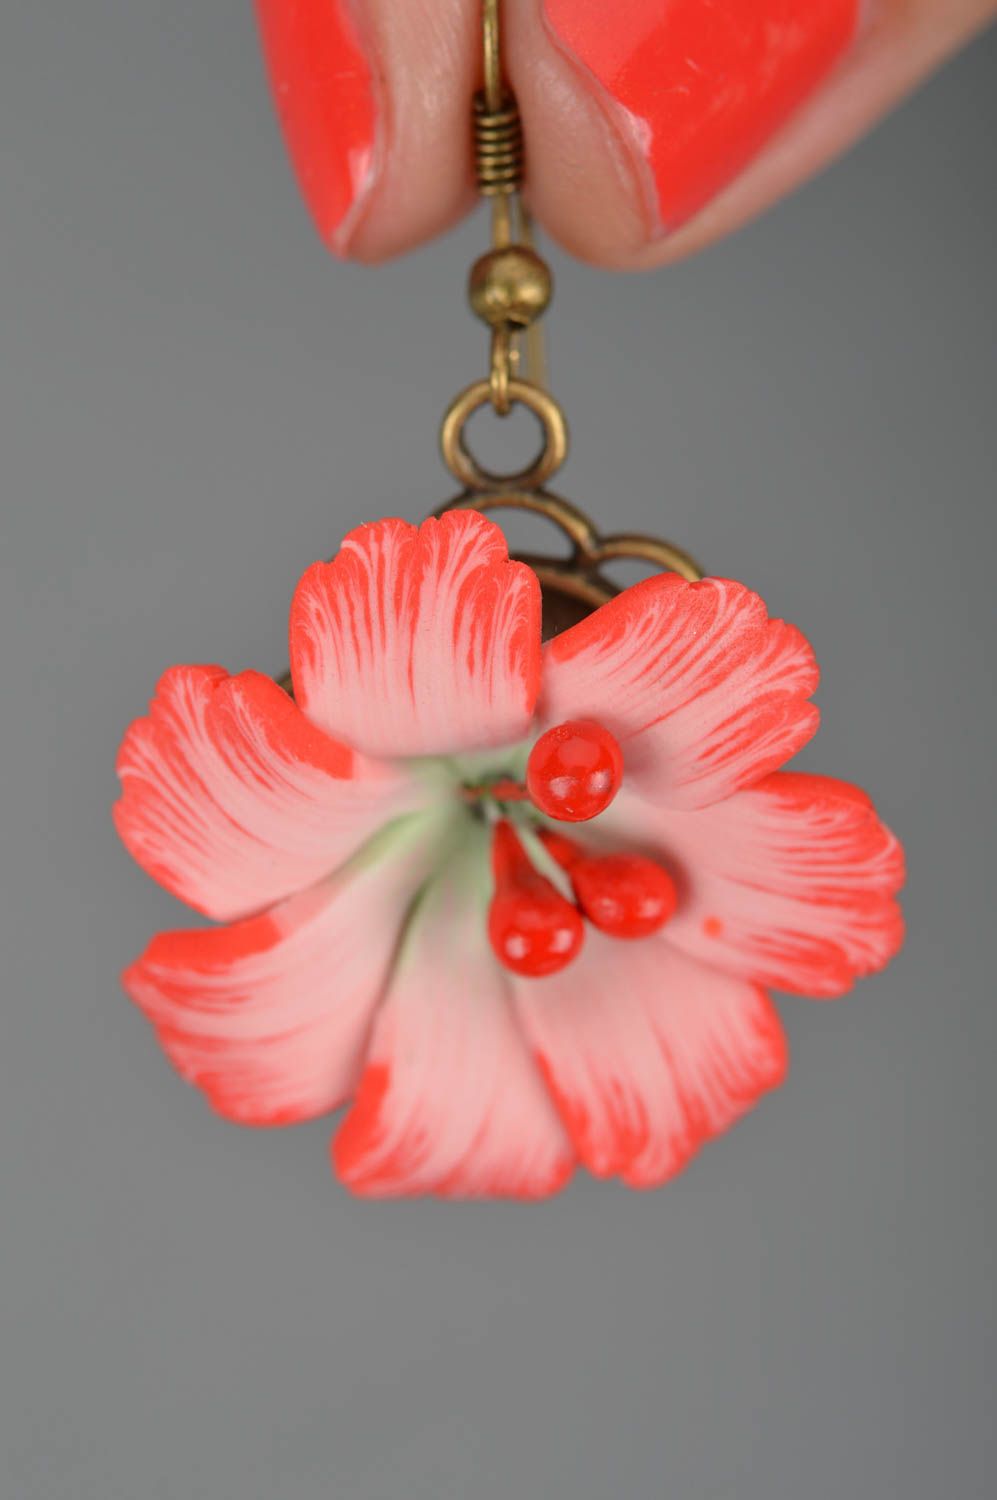 Cute small earrings with flowers made of polymer clay for stylish looks photo 3